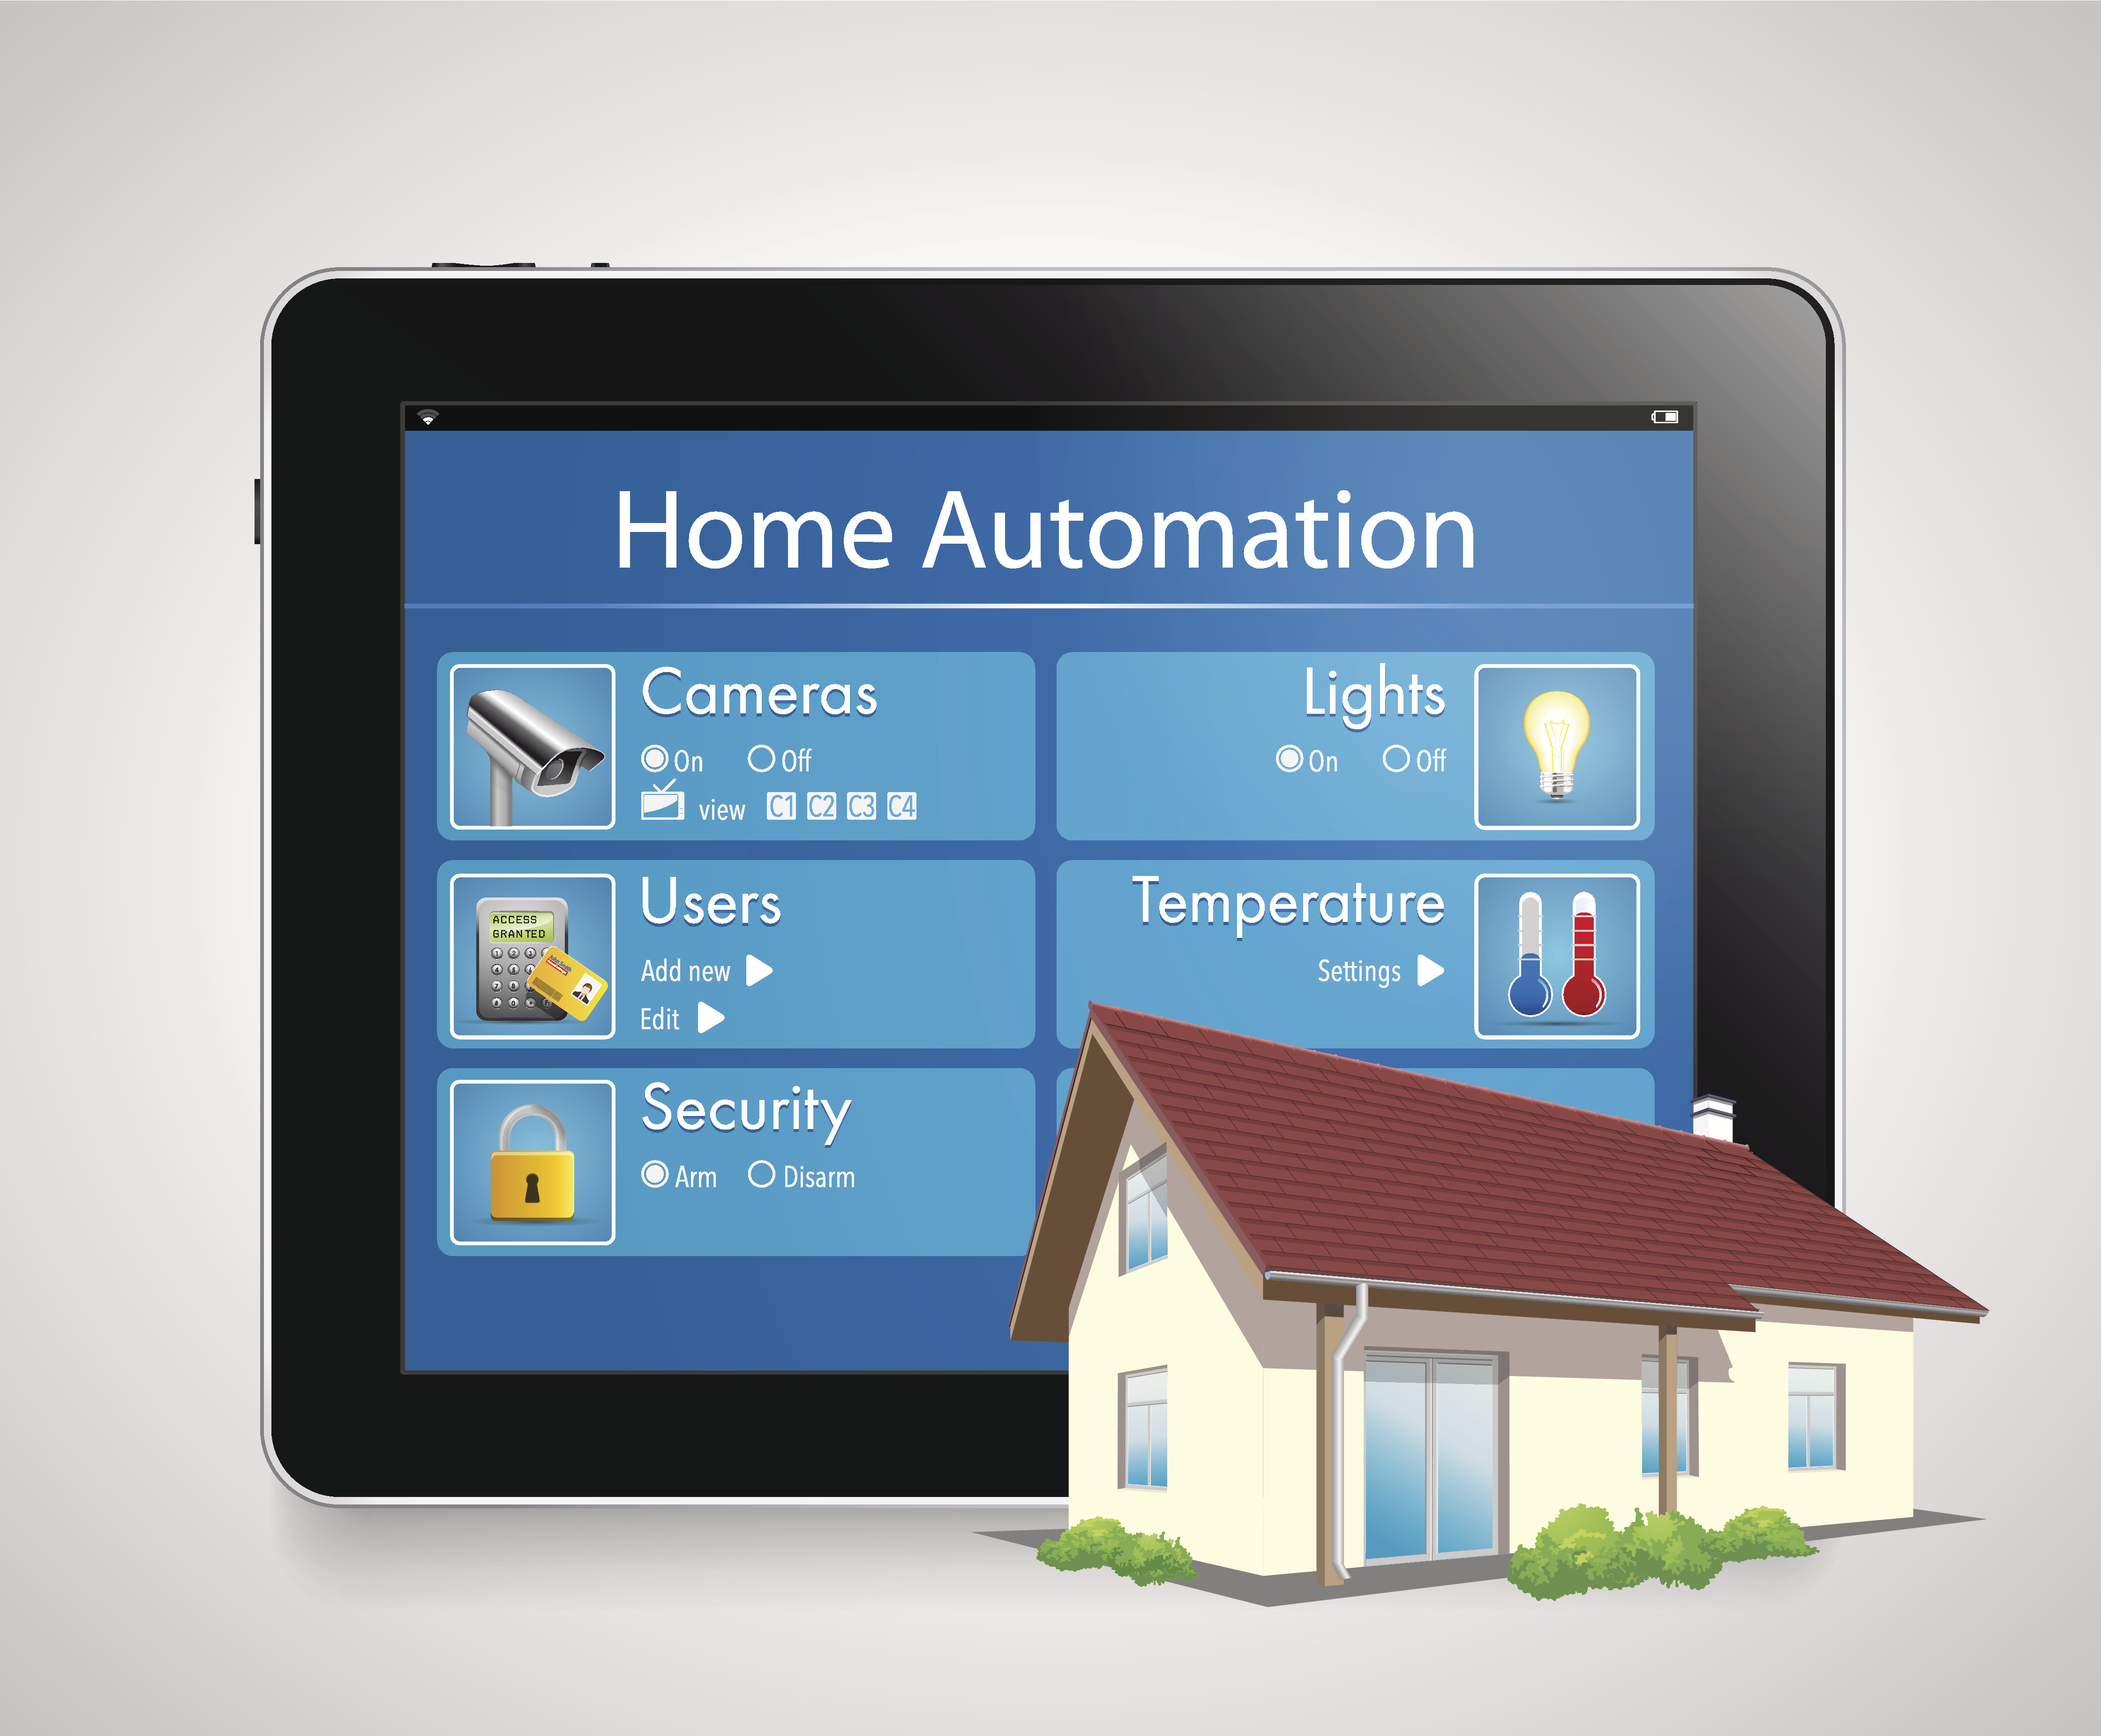 DIY Home Automation Systems
 A prehensive Guide For Do It Yourself Home Automation